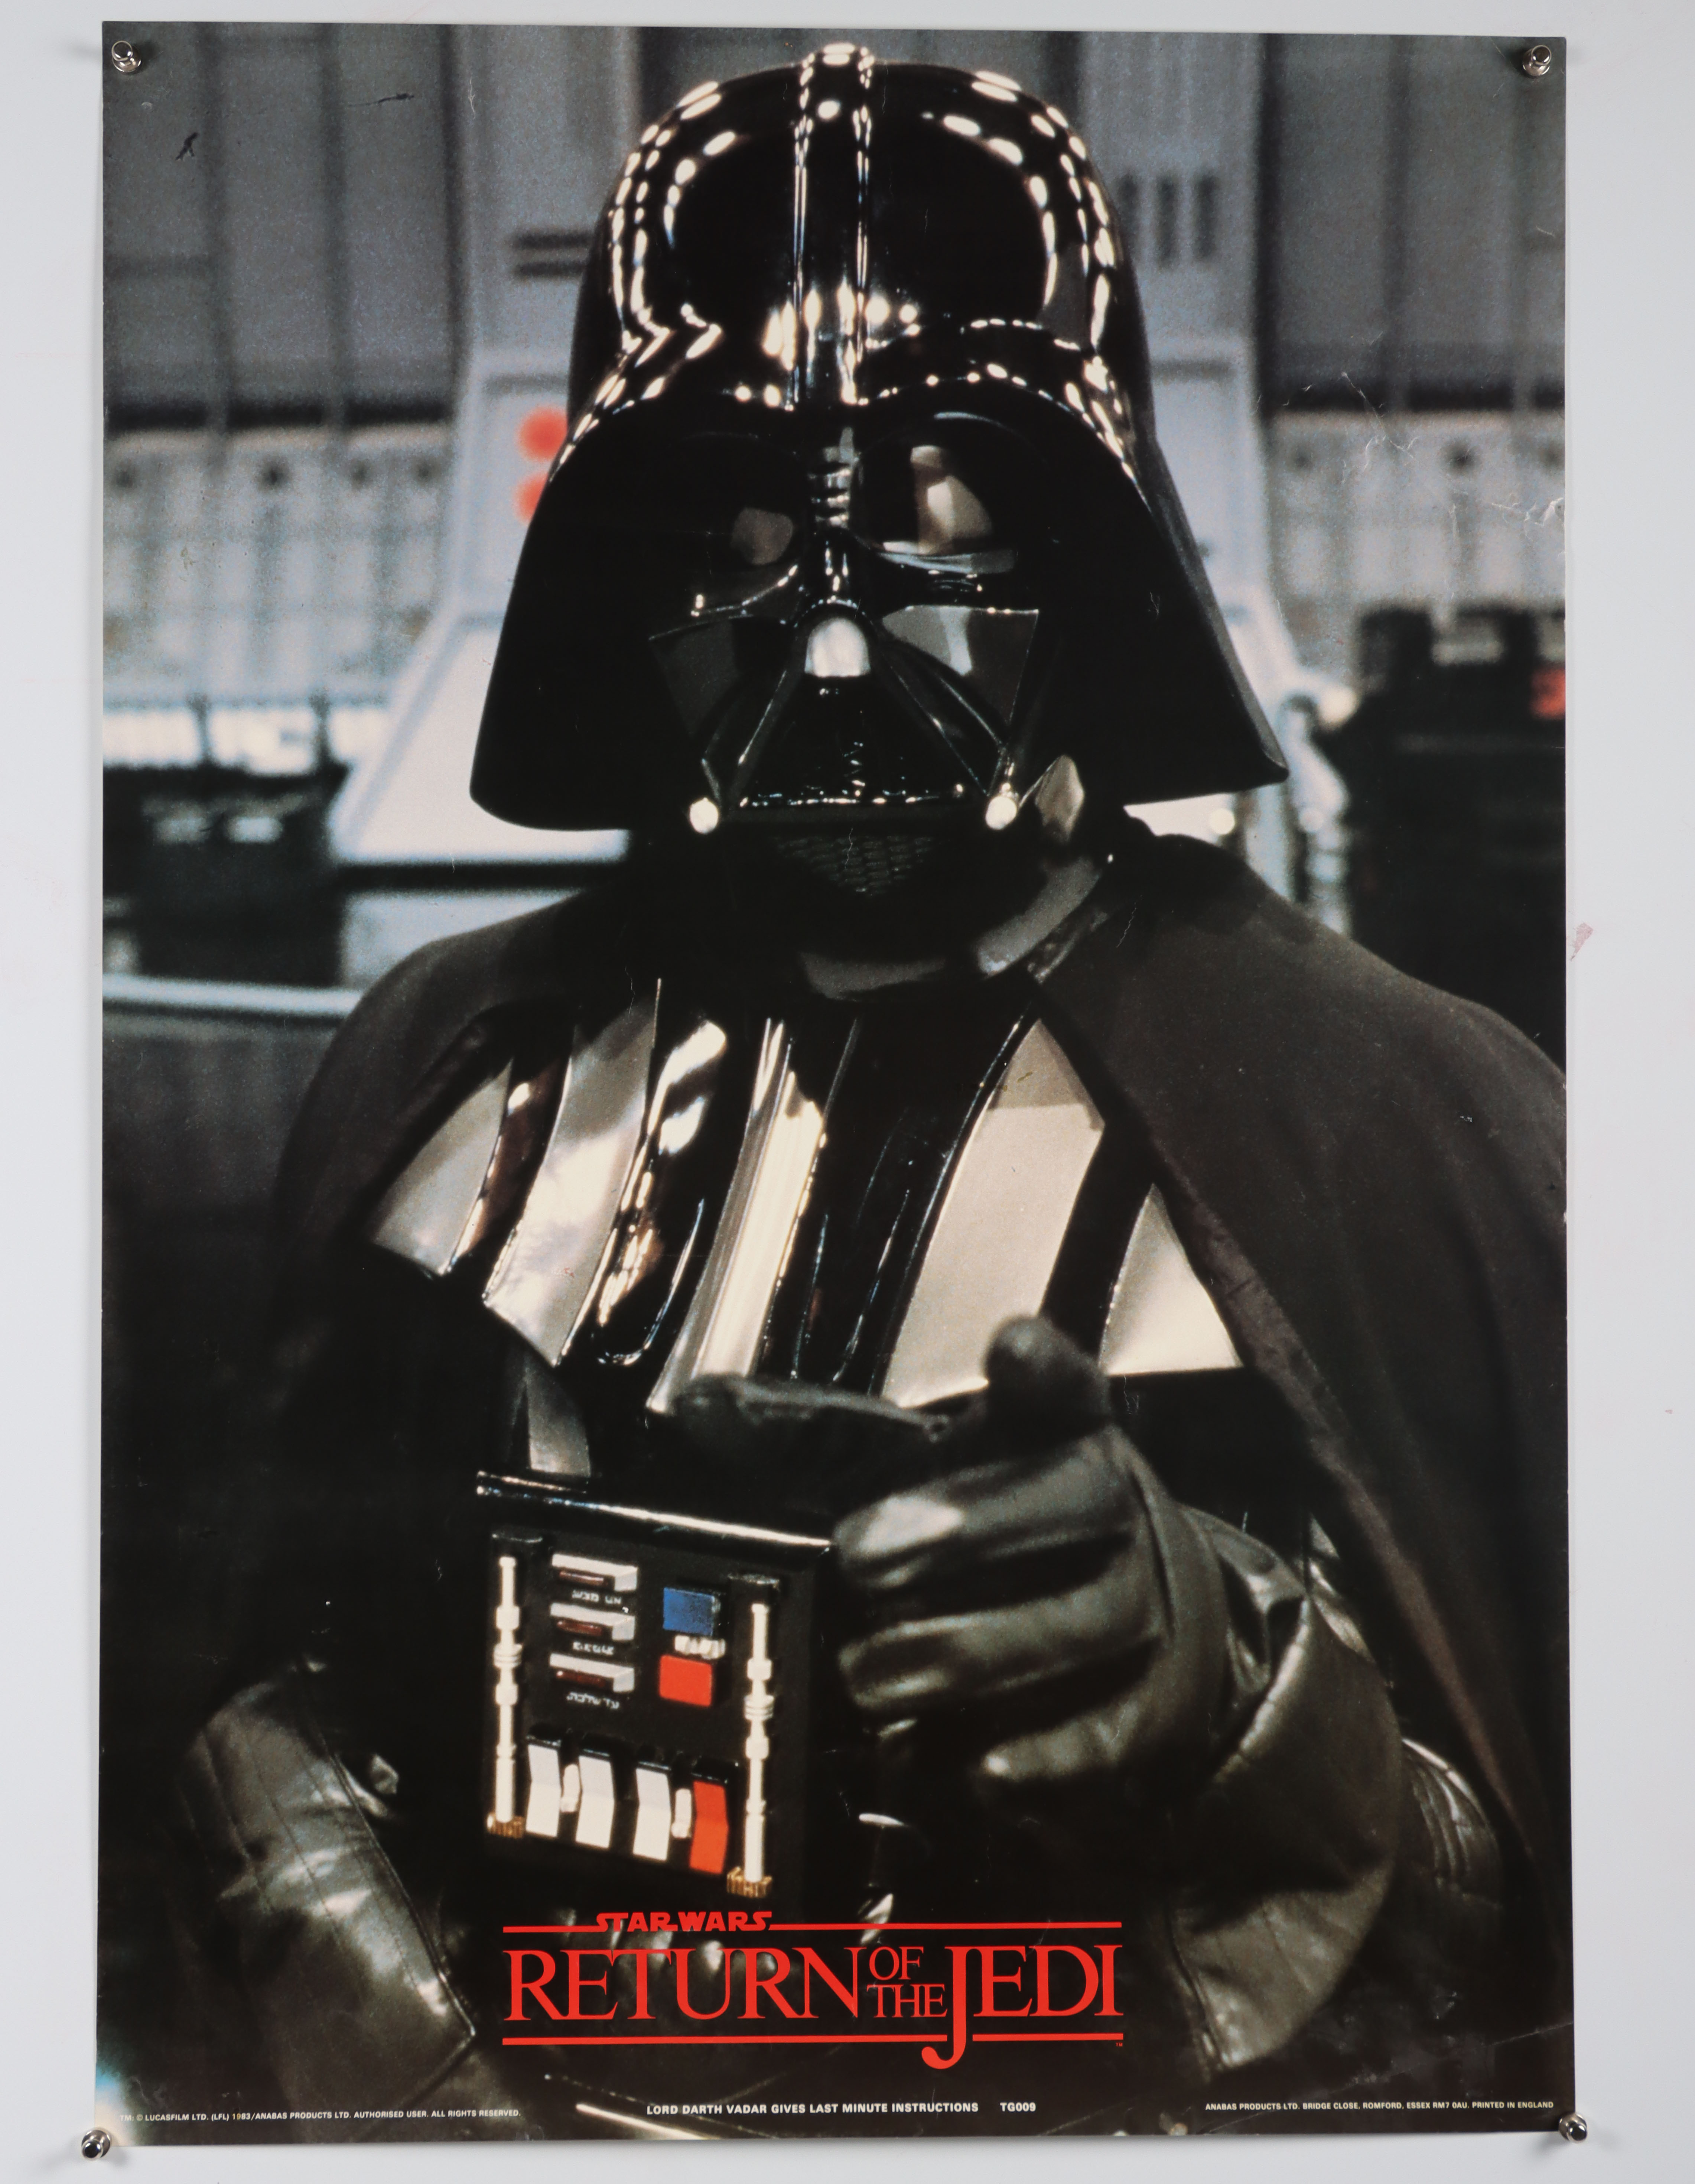 Two Star Wars Posters - Image 6 of 11